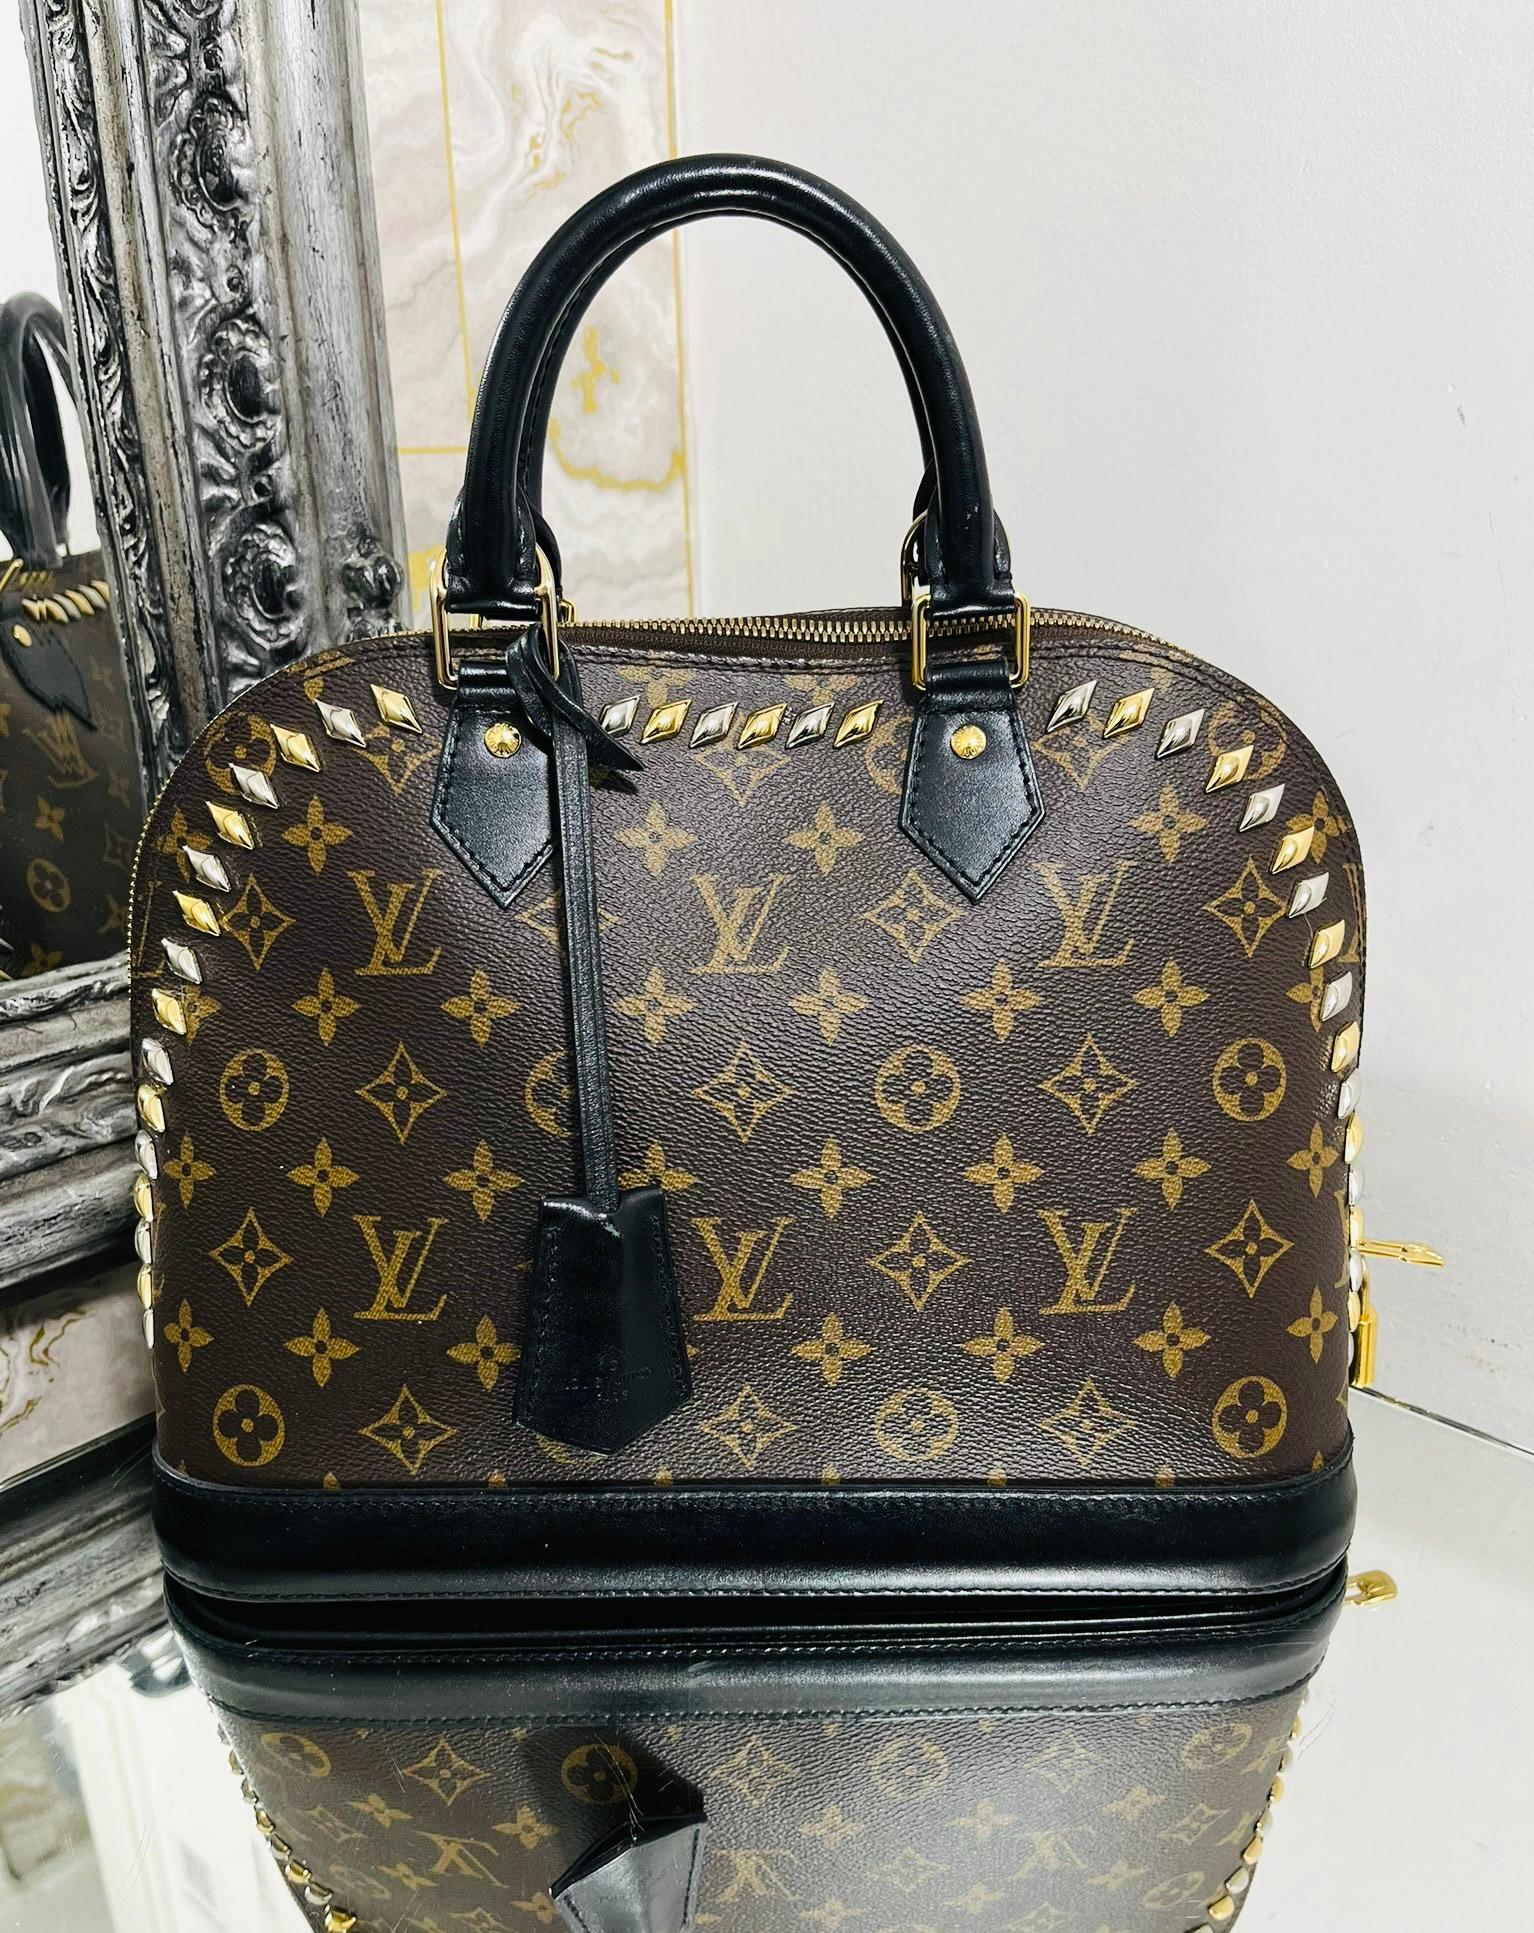 Louis Vuitton Cruise Runway Monogram Macassar Studded Alma Bag

Brown, textured handbag designed with the iconic 'LV' monogram throughout and detailed with gold and silver studs along the edges.

Styled with dark brown leather trims, padlock and key